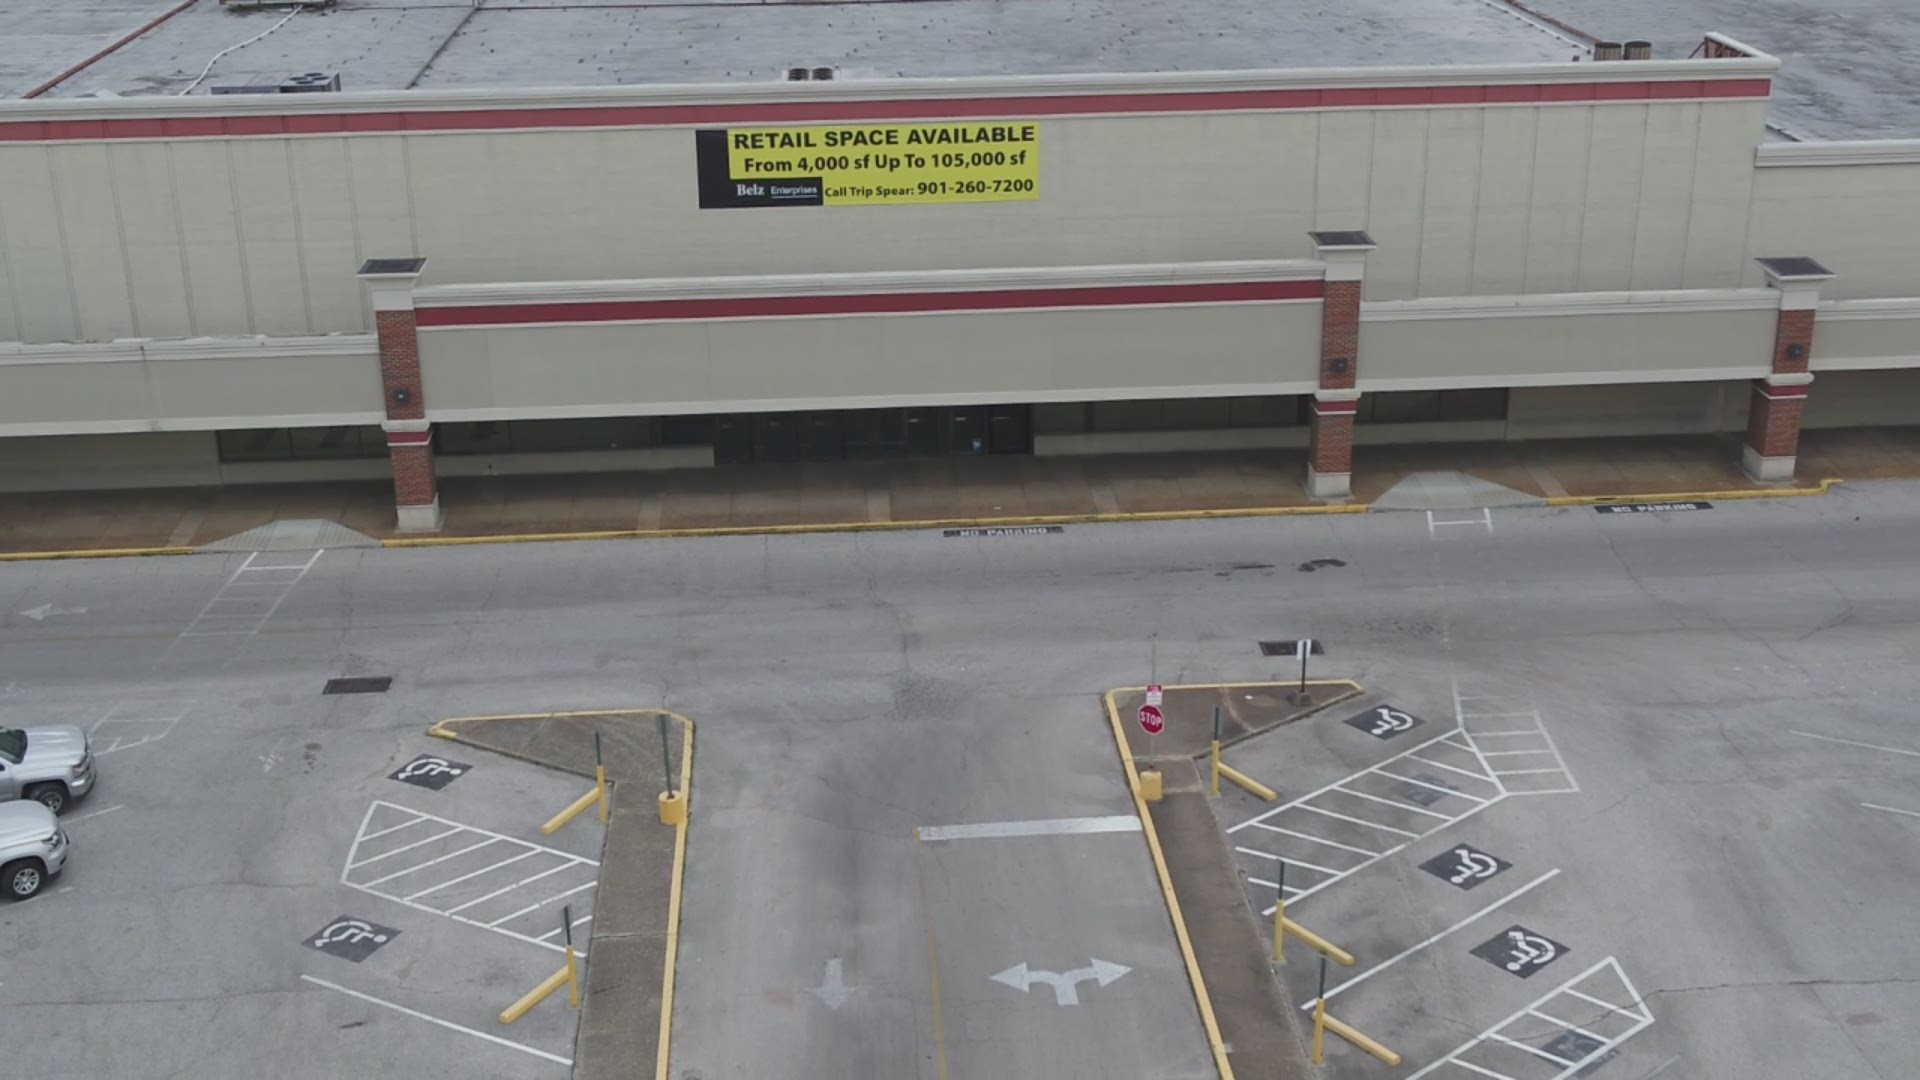 The State of Tennessee, with the help of the Army Corp of Engineers, plan to turn an empty strip mall into a temporary hospital for non-acute COVID-19 patients.